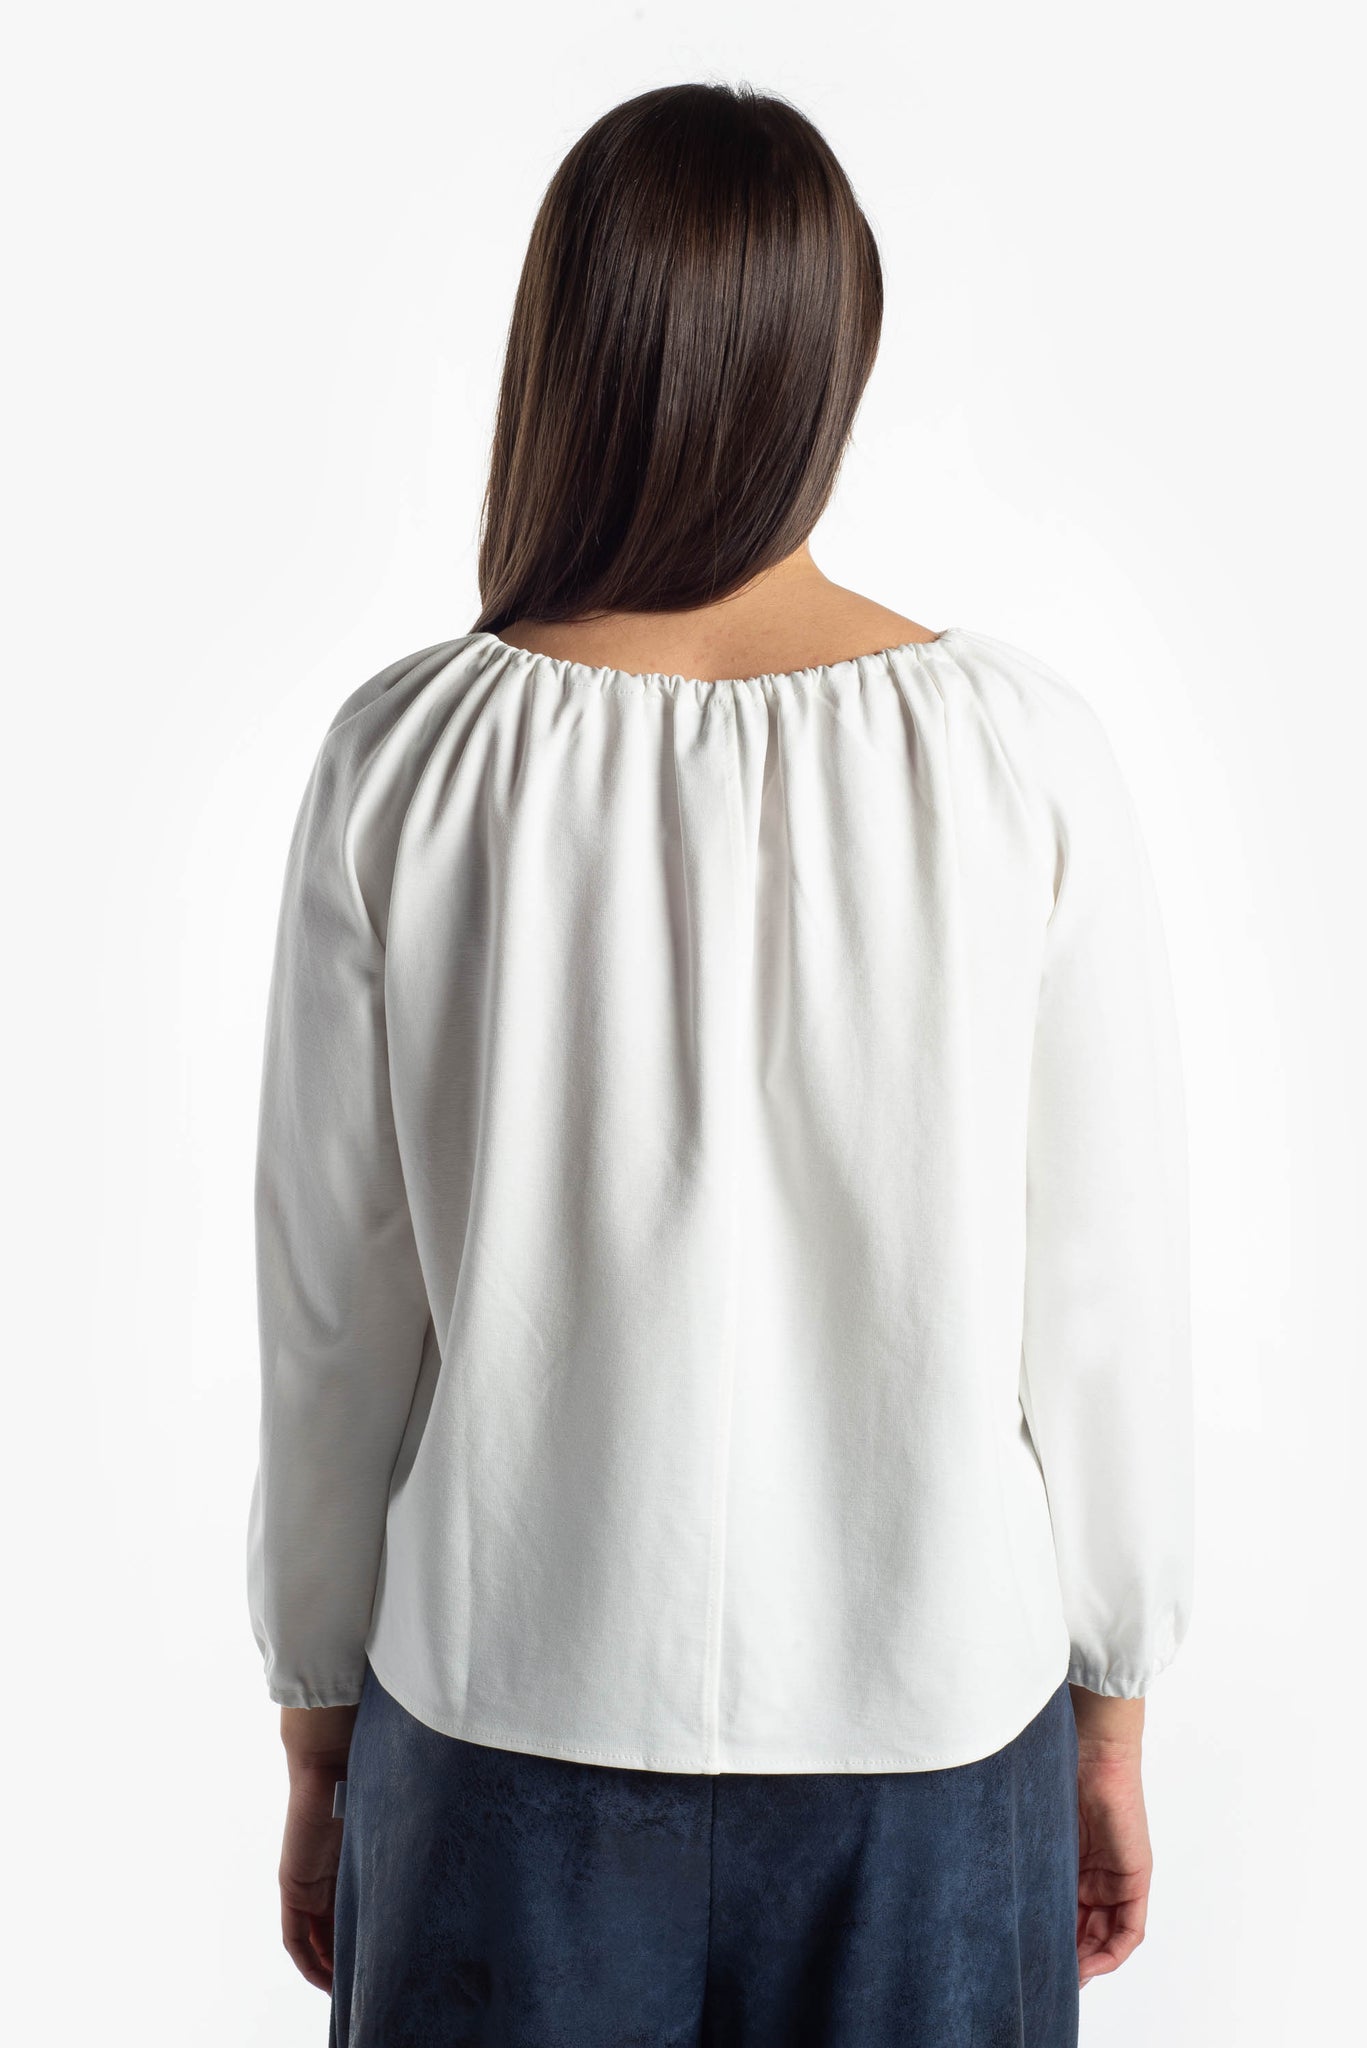 Sweatshirt in viscose fabric with gathered detail on the neck